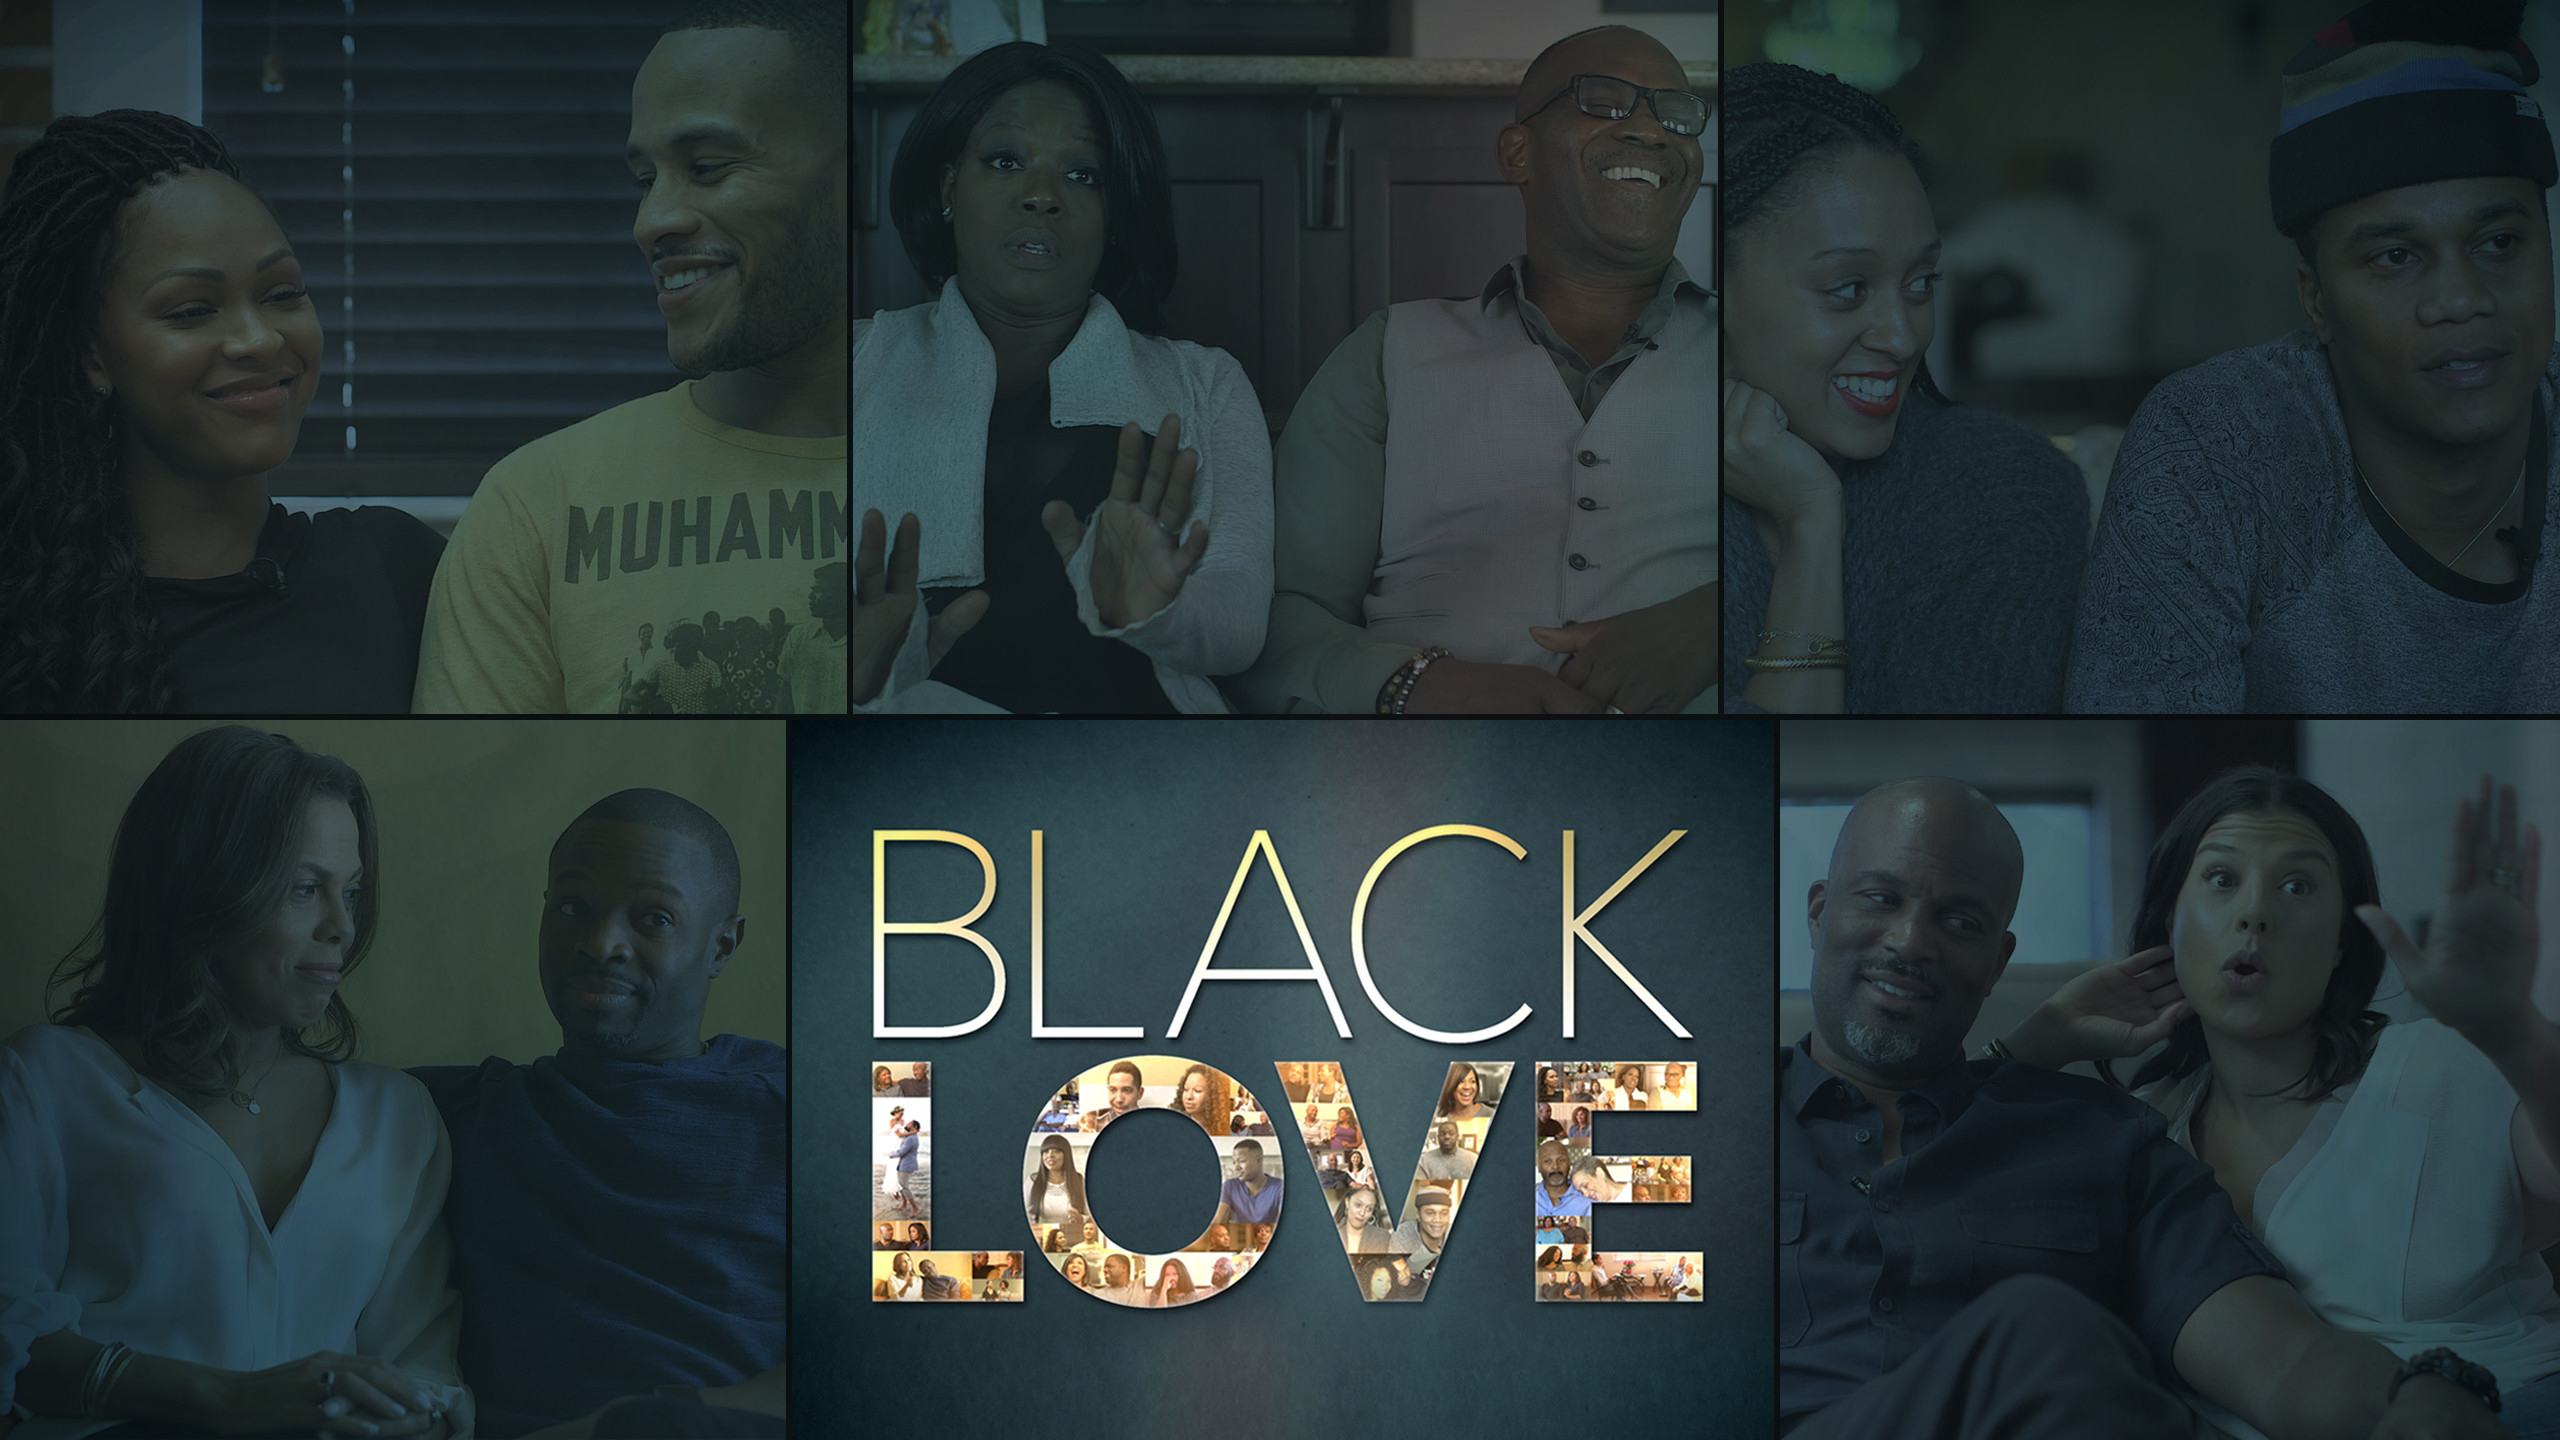 [09-15-17] Soul Savviness Radio Show: Black Love/Marriages